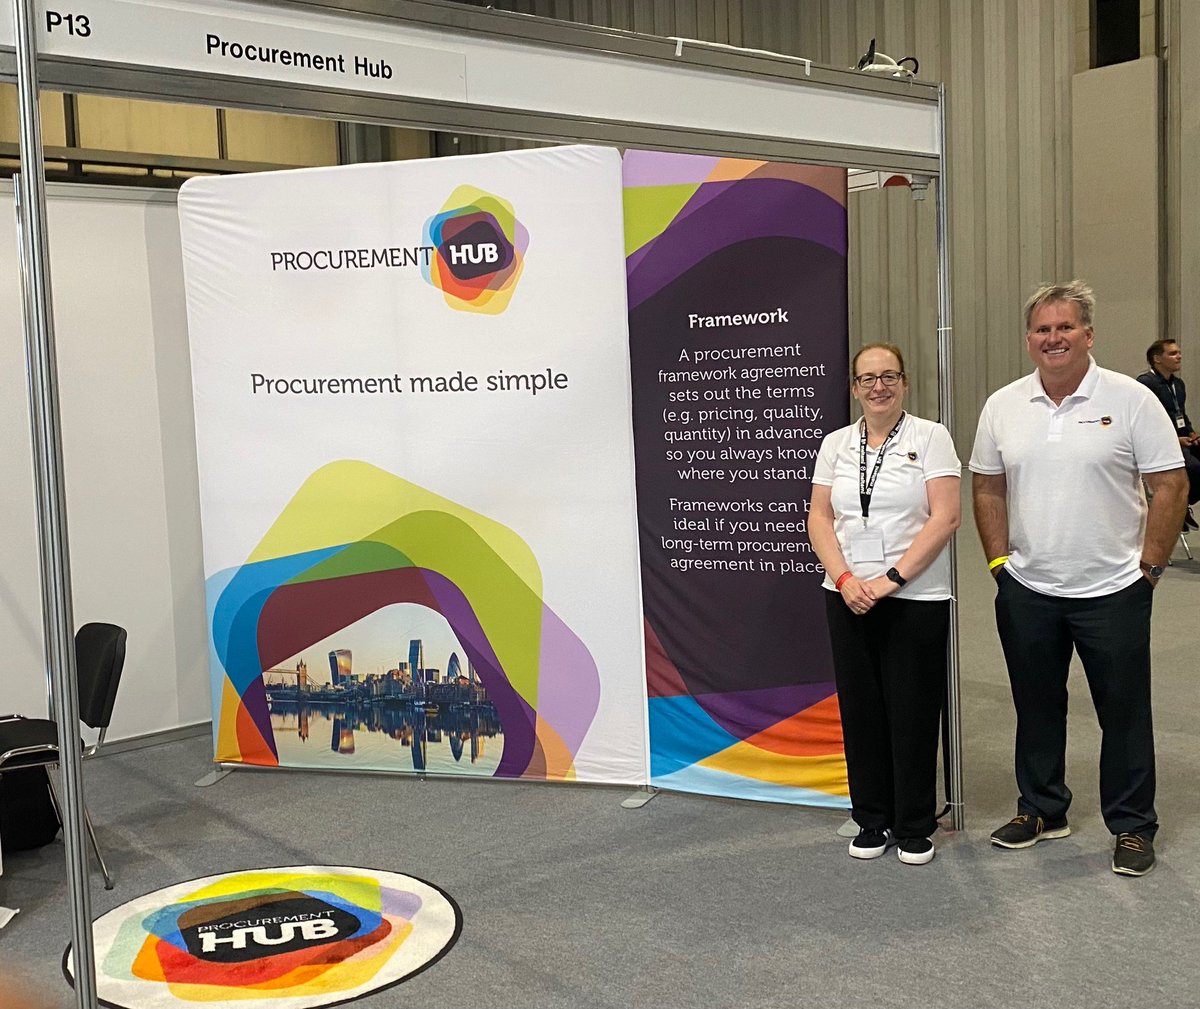 Today we're at @TheNEC for @ProcurexLive's annual conference! Visit our stand P13 to chat with a member of our friendly team or you can access the event online using the following link > bit.ly/3tDeSb9 #ProcurementHub #Procurex #ProcurementMadeSimple